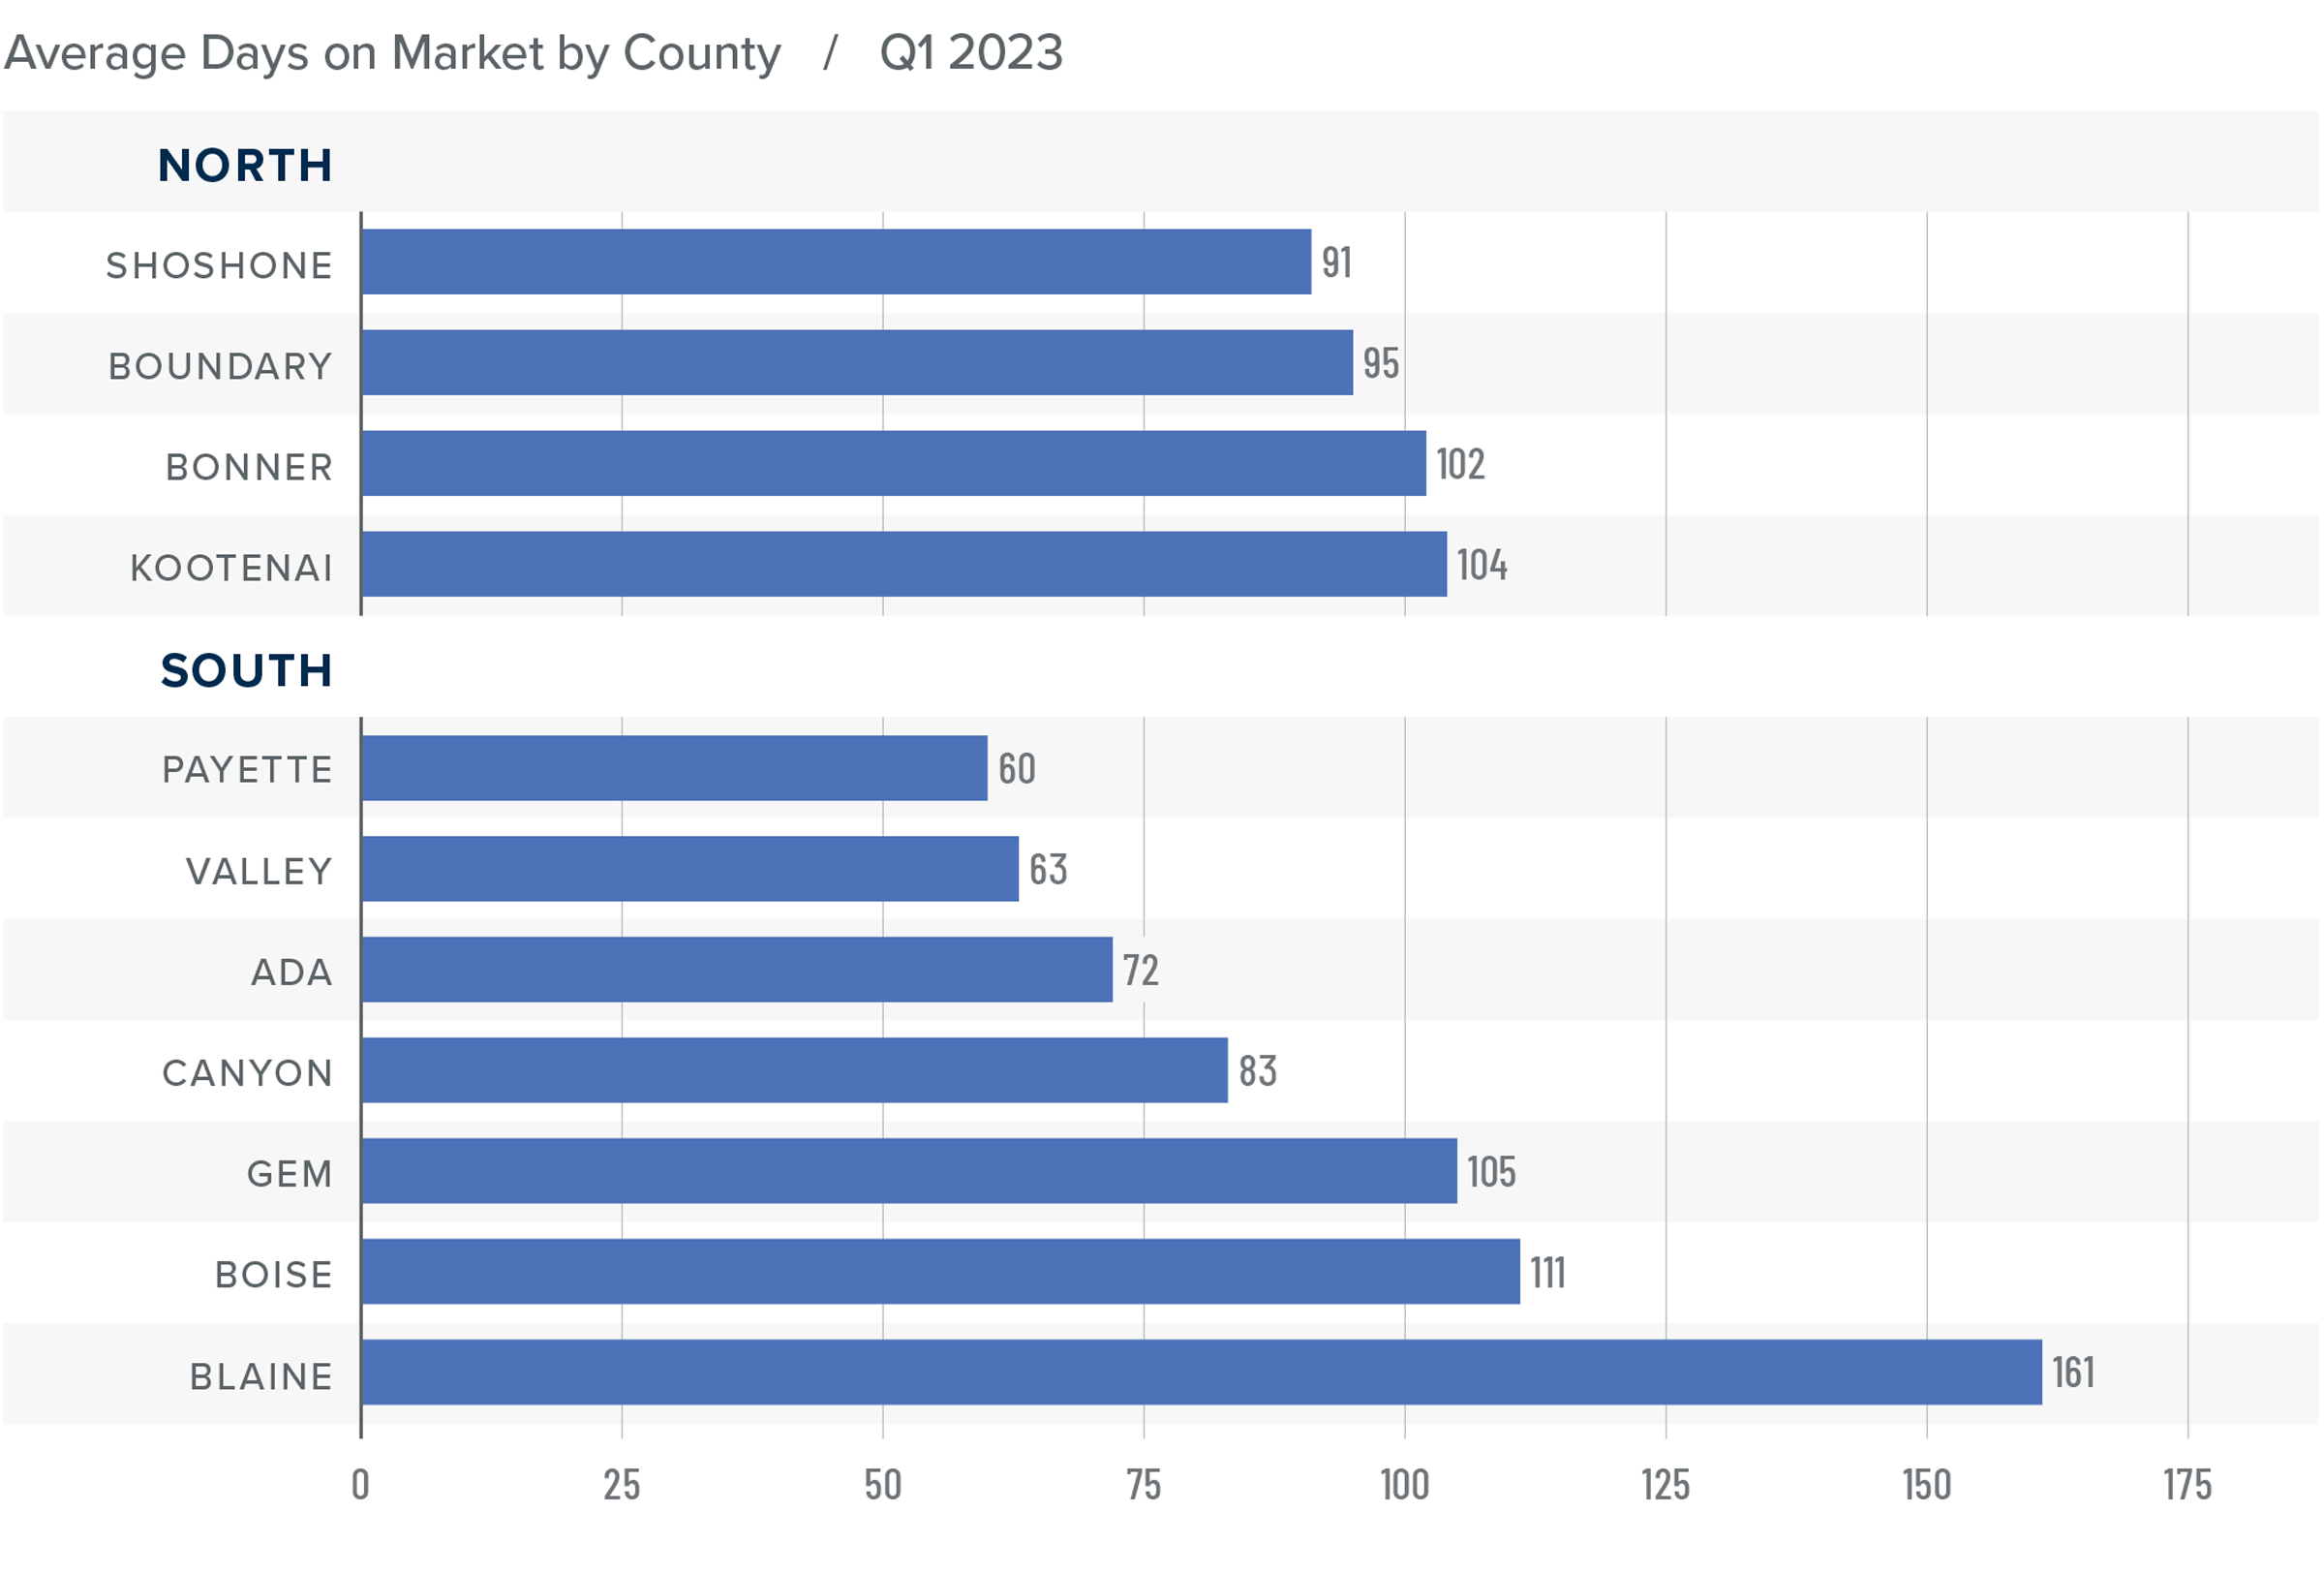 A bar graph showing the average days on market for homes in various counties in North and South Idaho for Q1 2023. Shoshone County has the lowest DOM in North Idaho at 91, followed by Boundary at 95, Bonner at 102, and Kootenai at 104. Payette has the lowest DOM in South Idaho at 60, followed by Valley at 63, Ada at 72, Canyon at 83, Gem at 105, Boise at 111, and Blaine at 161.